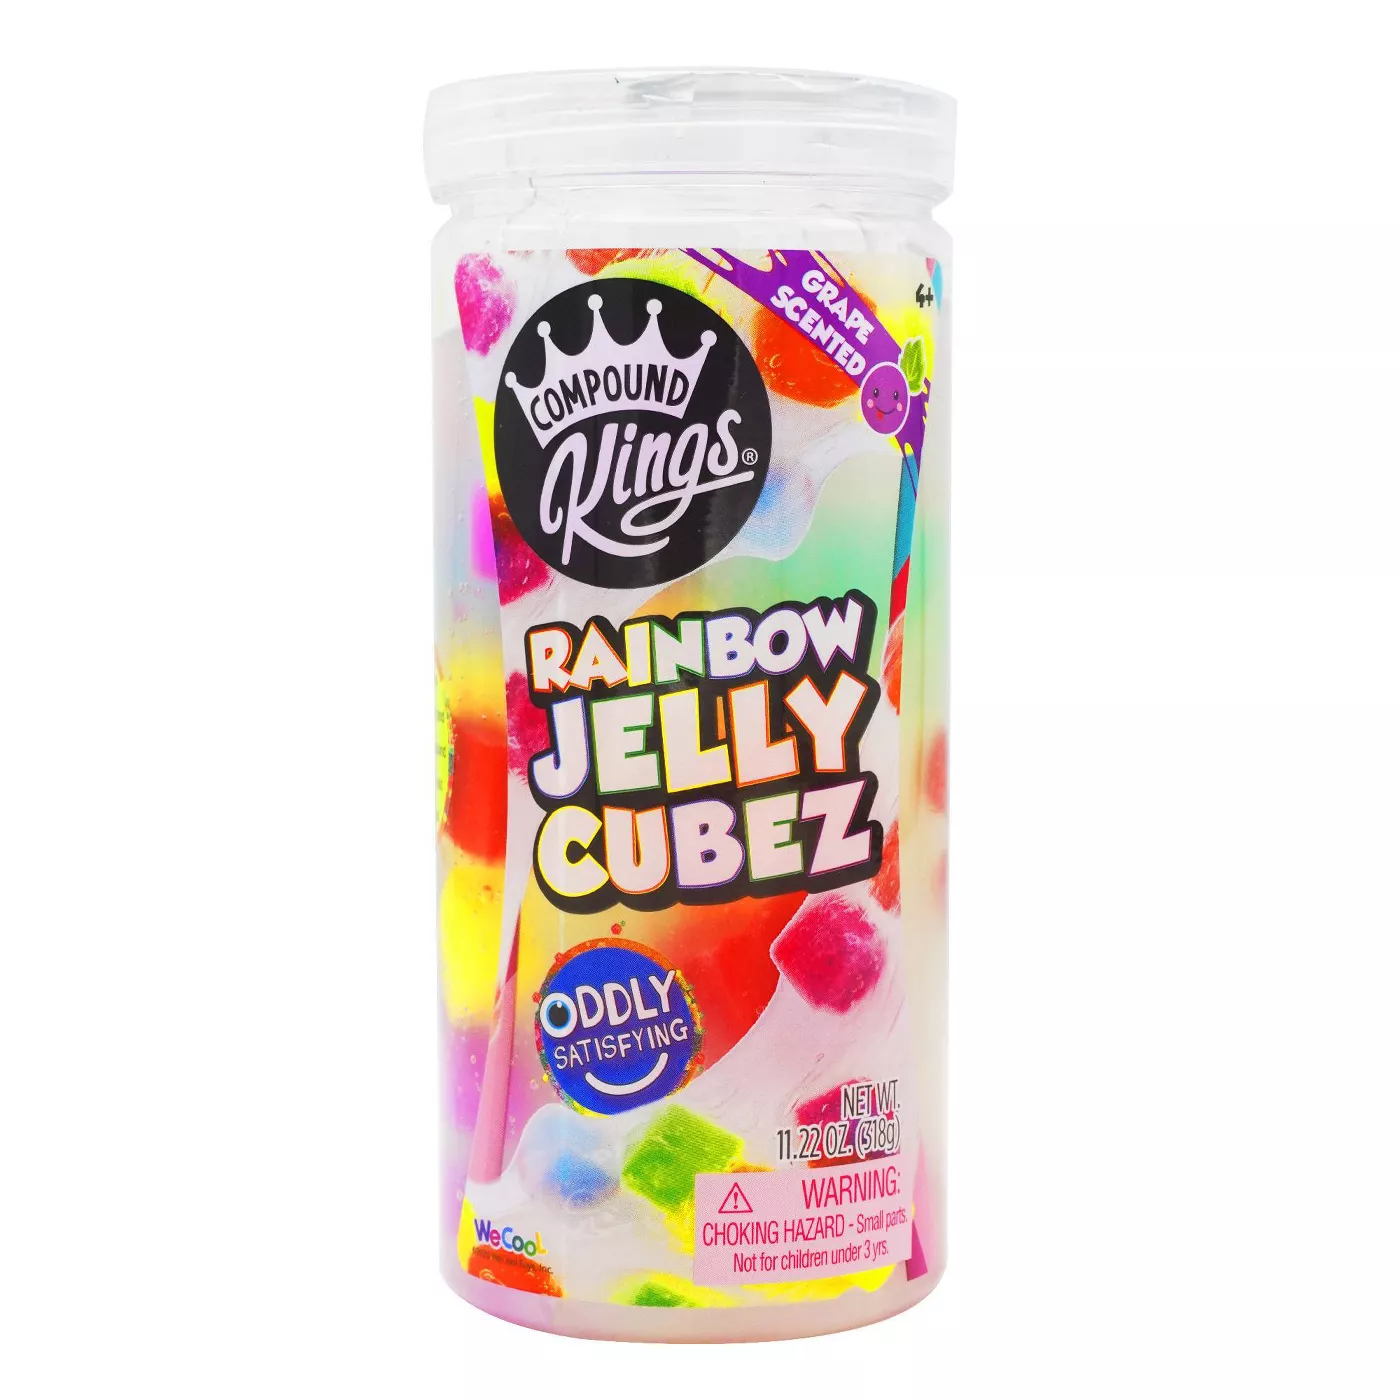 Compound Kings Rainbow Jelly Cubez Grape Scented - image 1 of 6